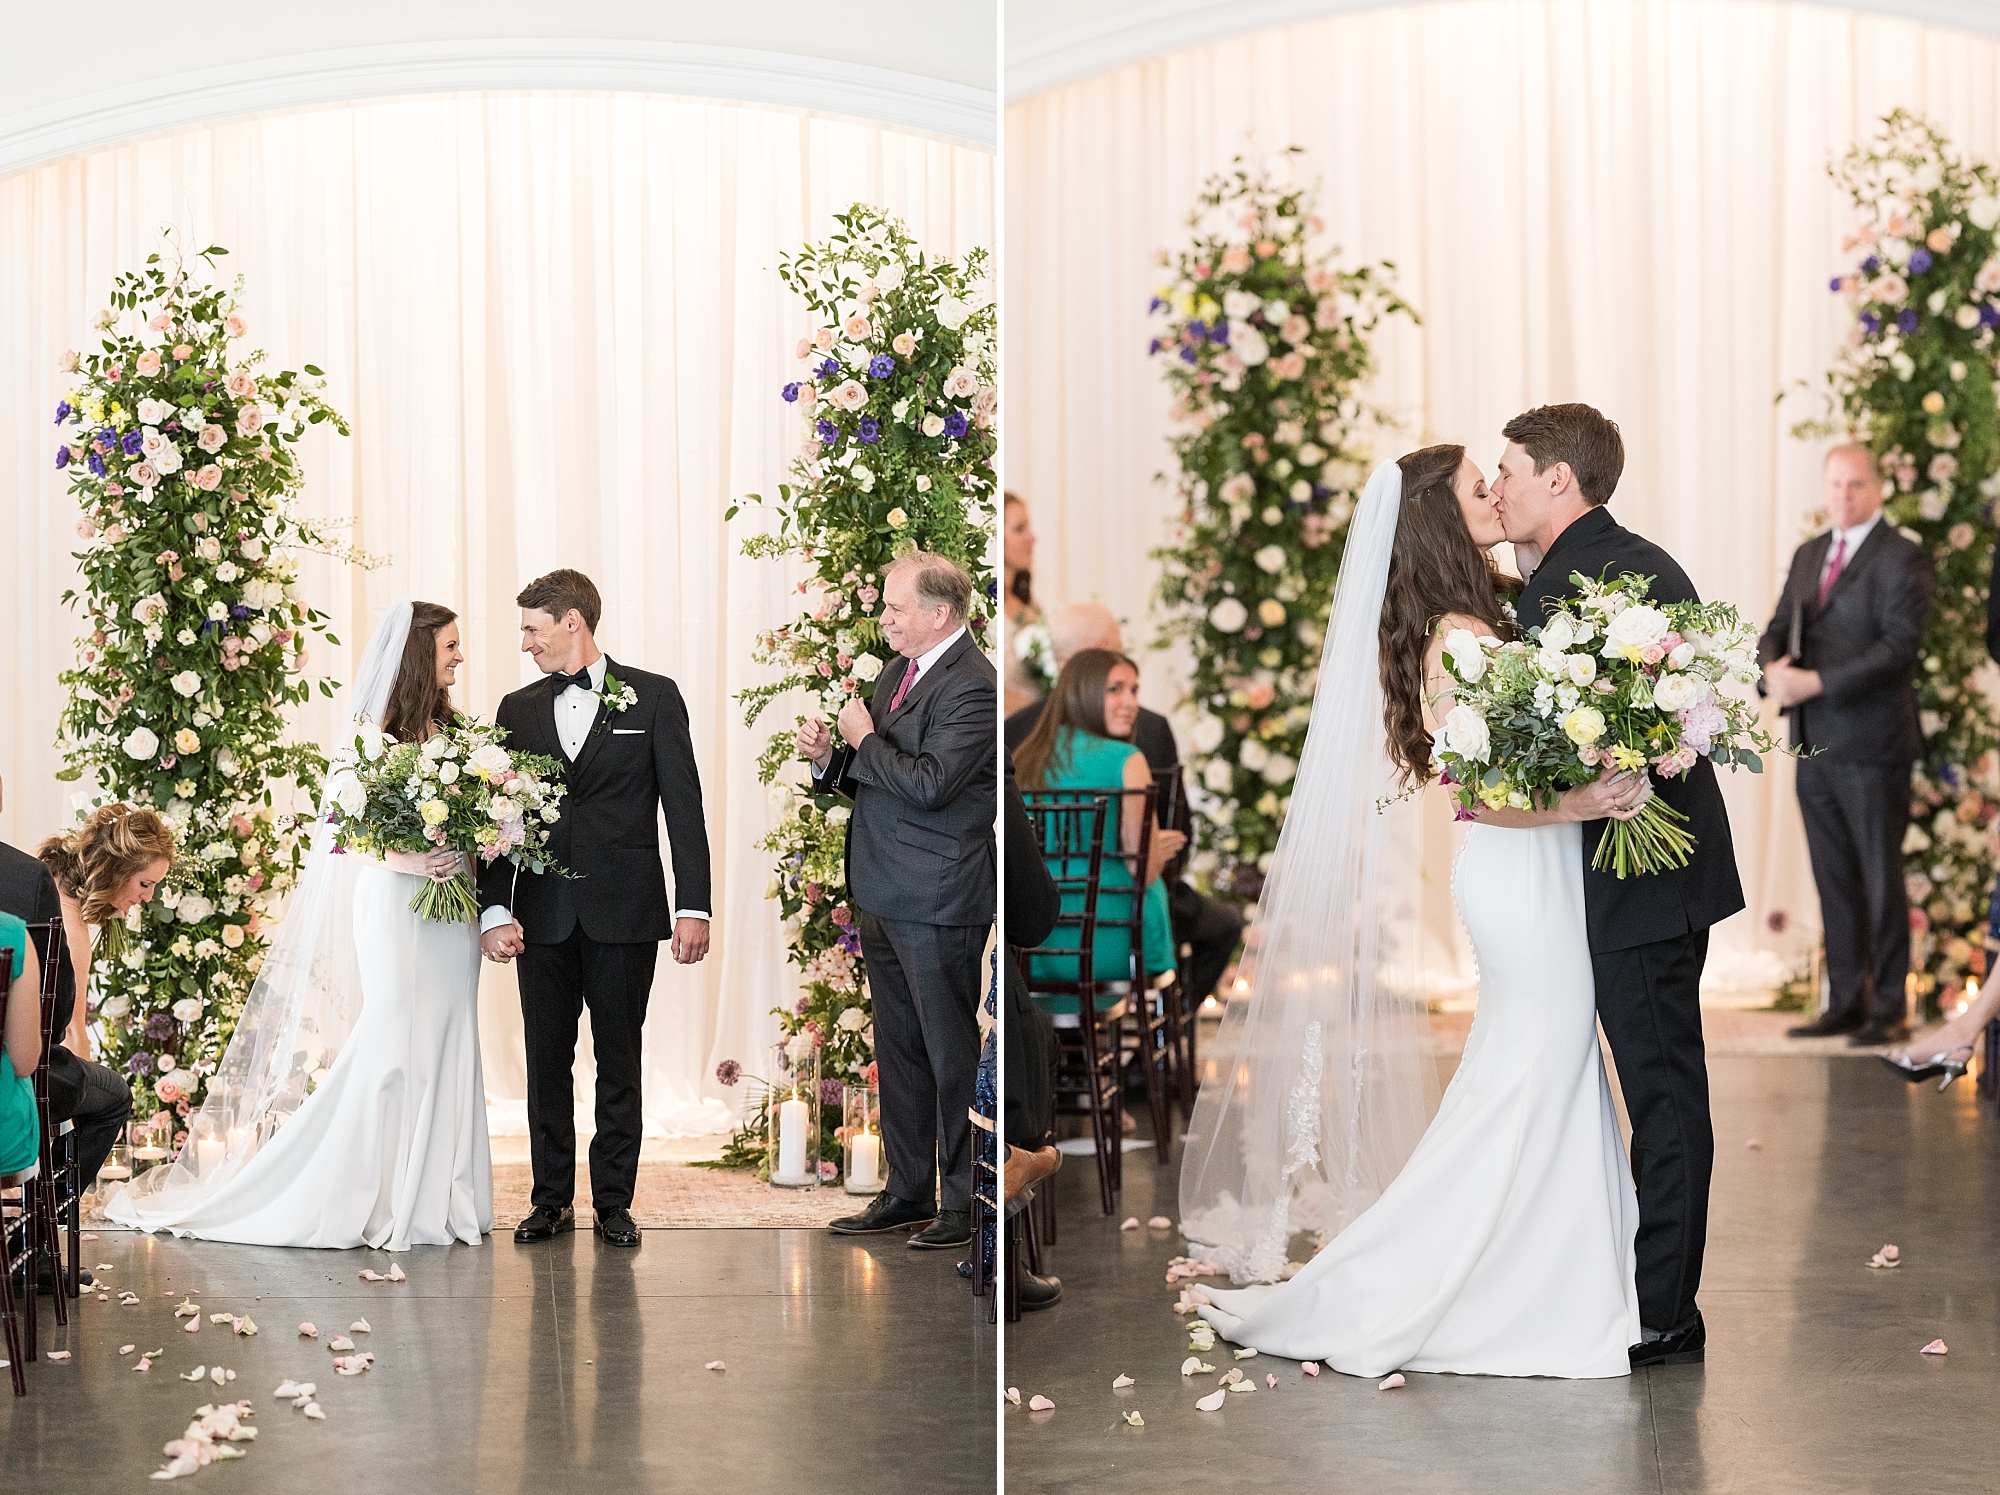 The bride and groom are announced husband and wife and share their first kiss | Merrimon Wynne Wedding | Sarah Hinckley Photography | Raleigh NC Wedding Photographer